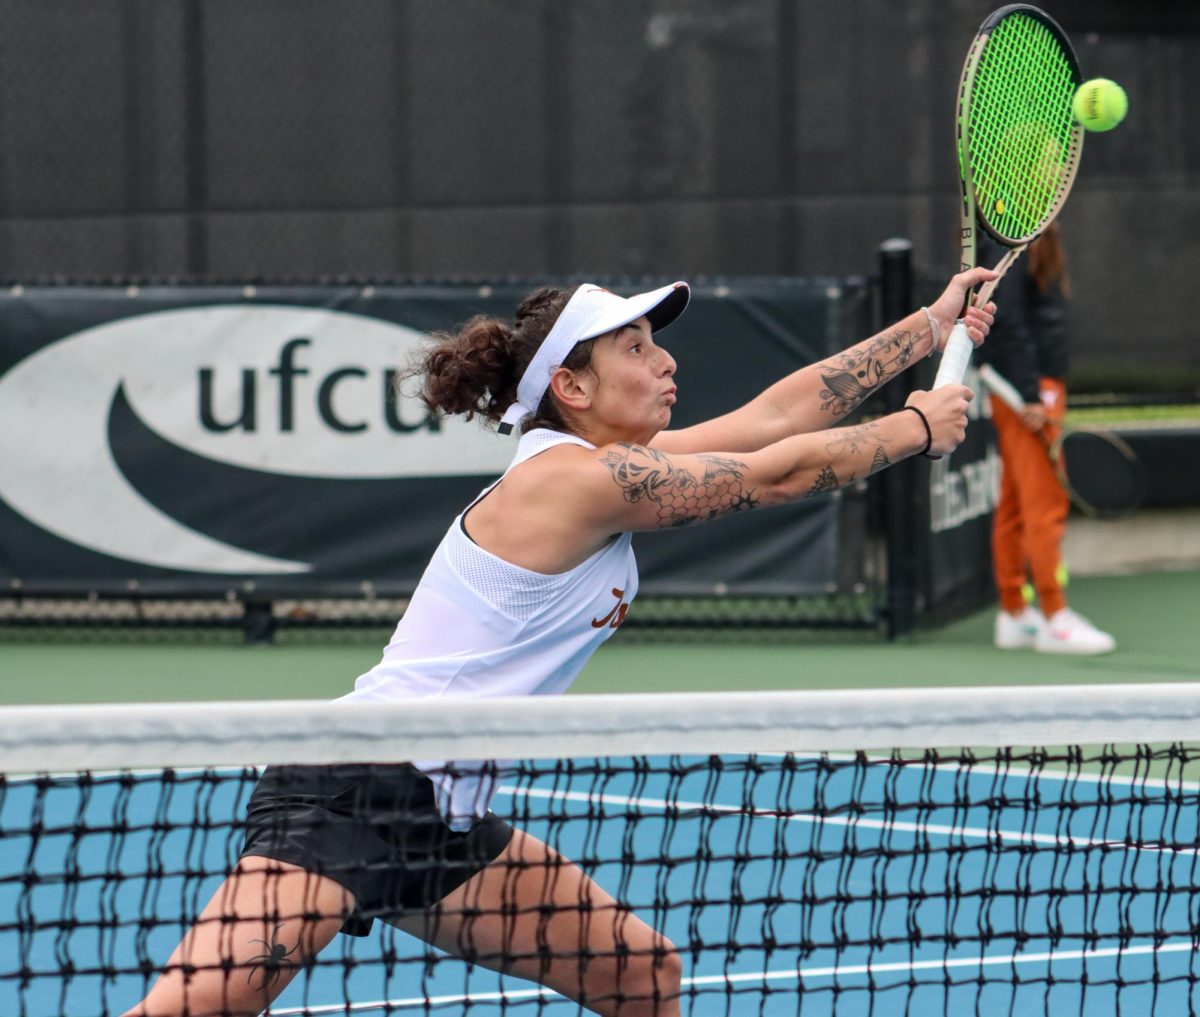 Redshirt sophomore Vivian Ovrootsky lunges to return the ball on Jan. 26, 2024. In singles play, Ovrootsky was leading 6-4 against Danielle Tuhten of Baylor University when play stopped as the Longhorns clinched the win.